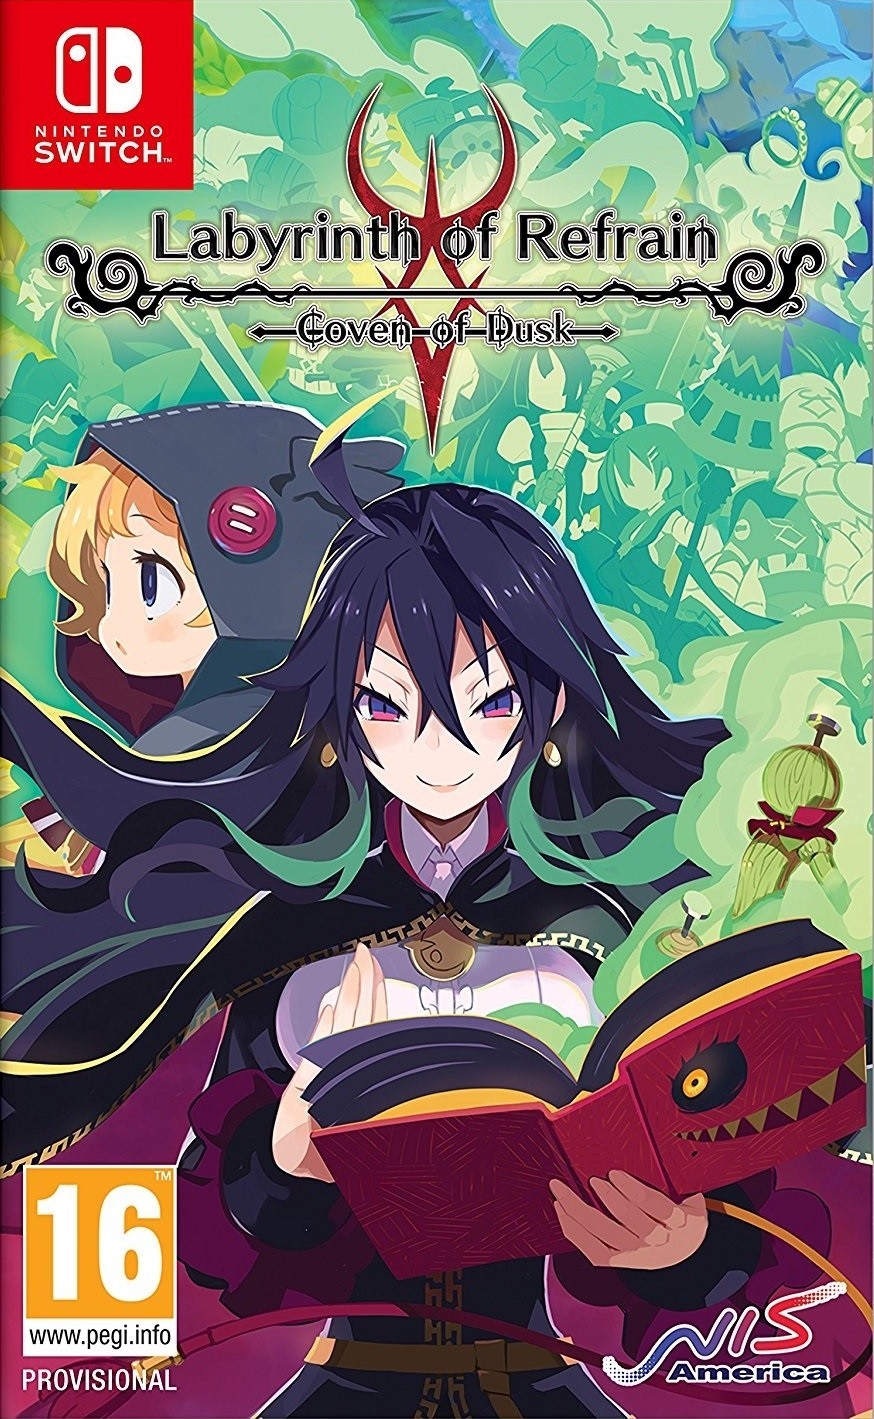 Labyrinth of Refrain: Coven of Dusk (Switch), Nippon Ichi Software